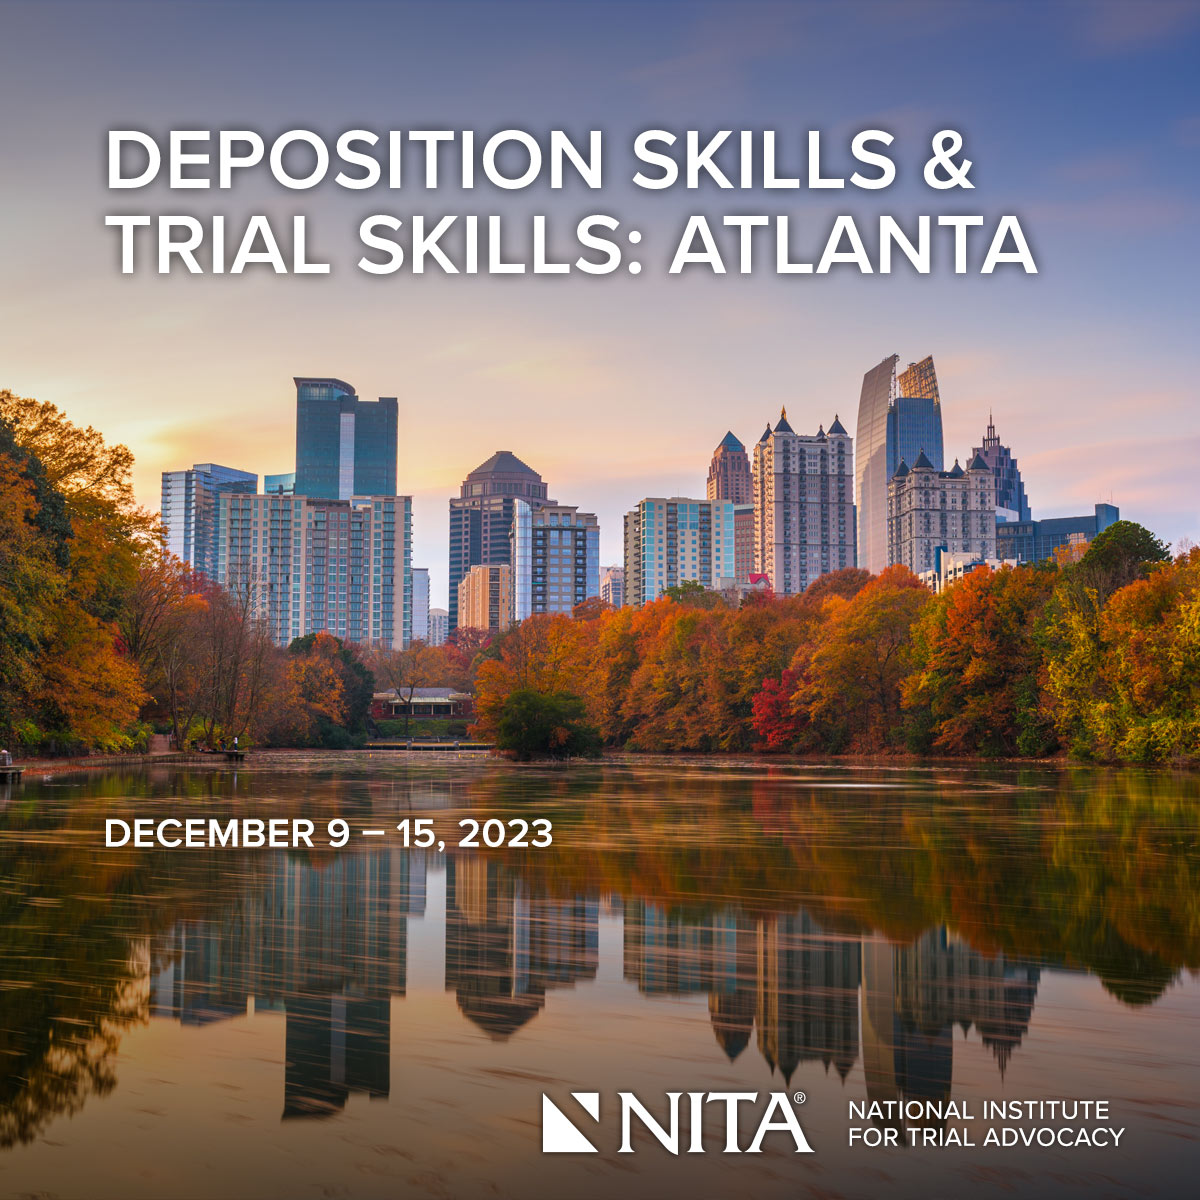 Check out NITA's upcoming Deposition Skills & Trial Skills course in Atlanta. Interested to learn more? Click the link in the bio to visit our website. nita.org/s/product/depo…